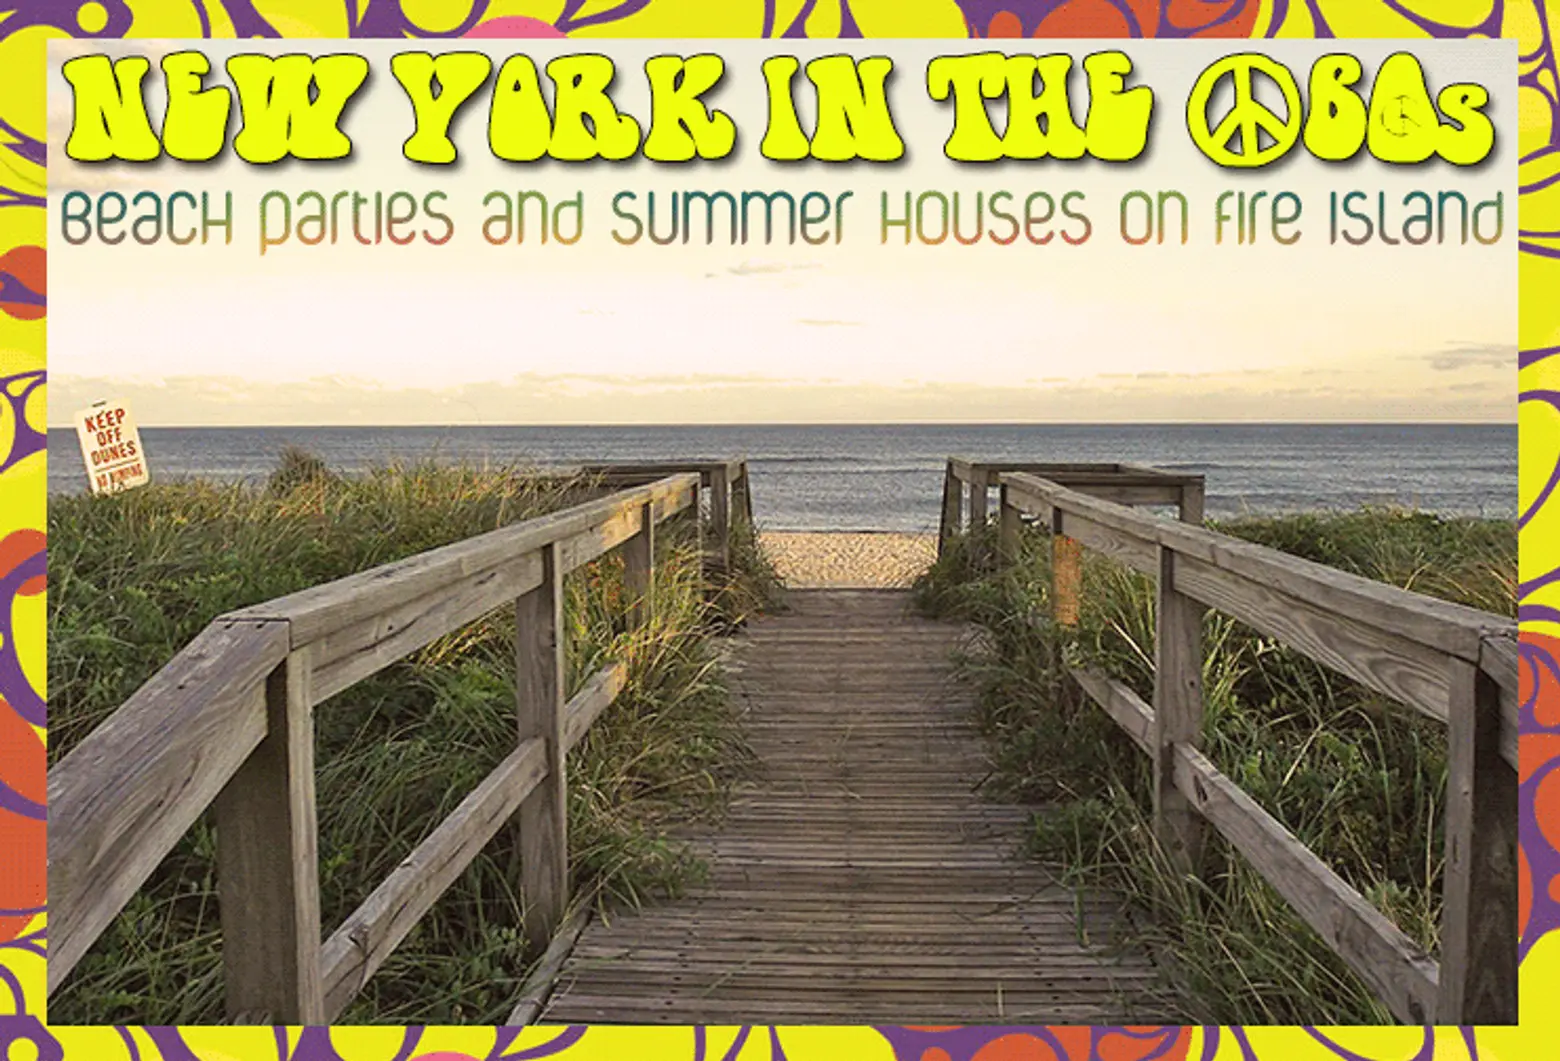 New York in the ’60s: Beach Parties and Summer Houses on Fire Island